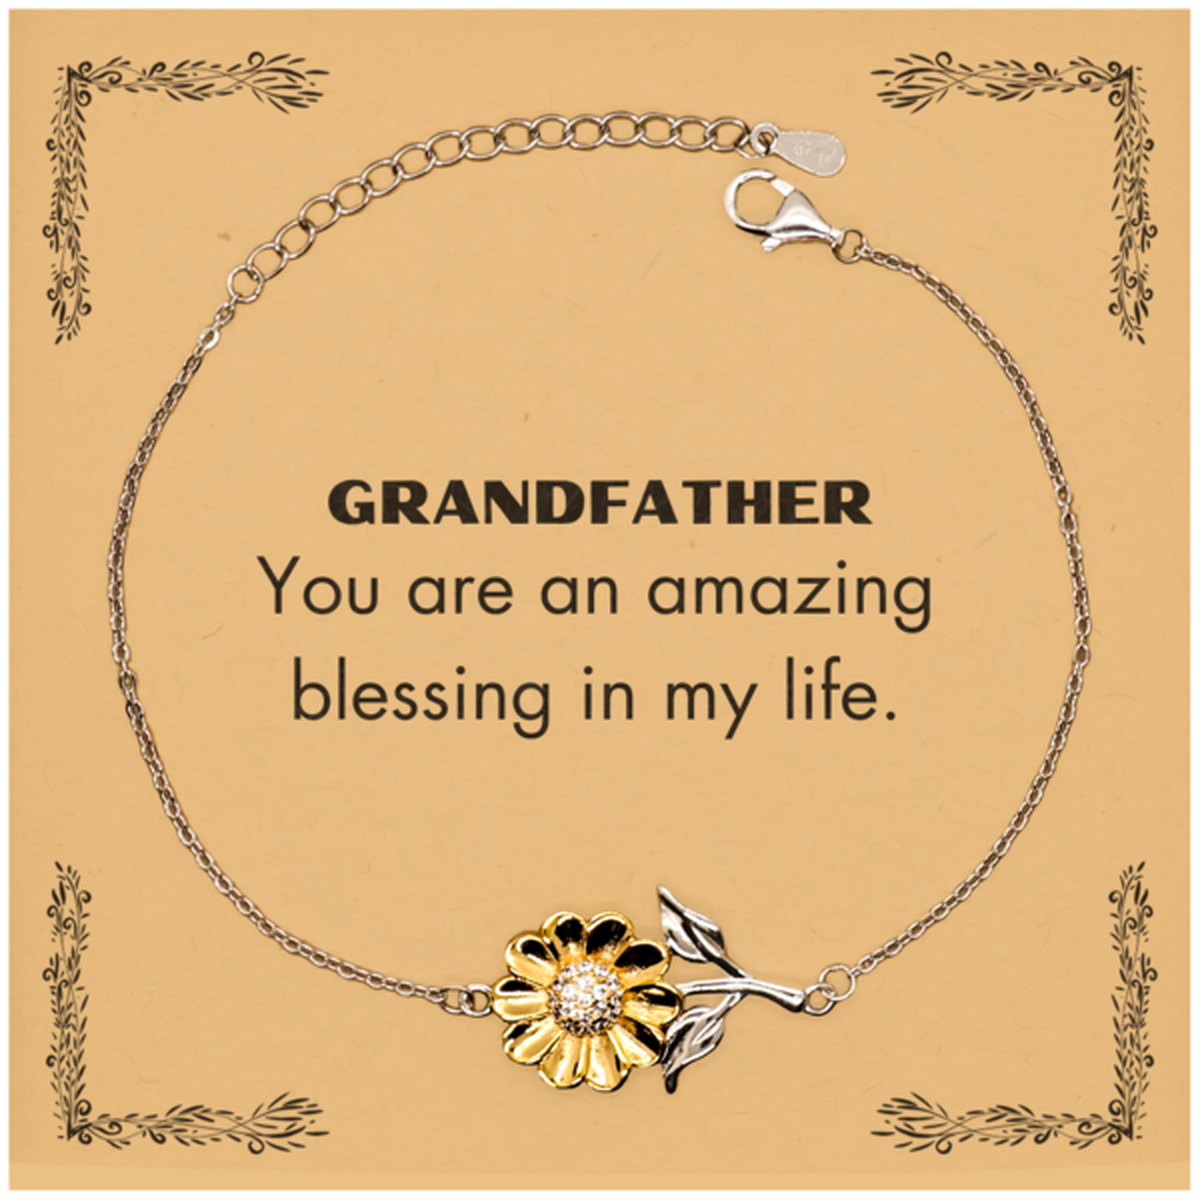 Grandfather Sunflower Bracelet, You are an amazing blessing in my life, Thank You Gifts For Grandfather, Inspirational Birthday Christmas Unique Gifts For Grandfather